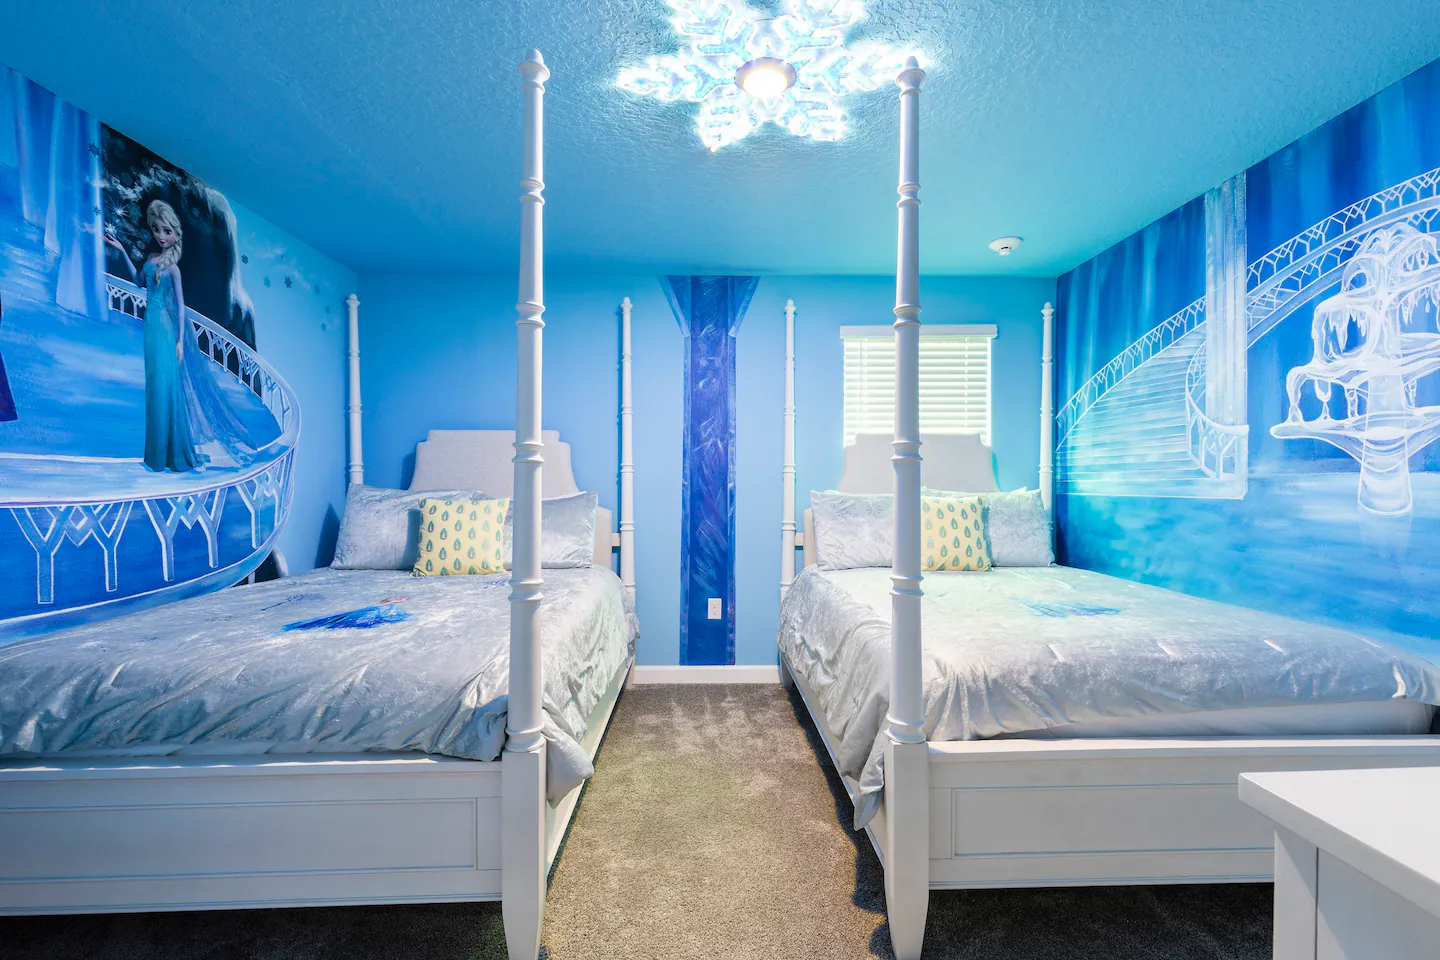 The "Frozen" Themed Bedroom with 2 queen princess beds